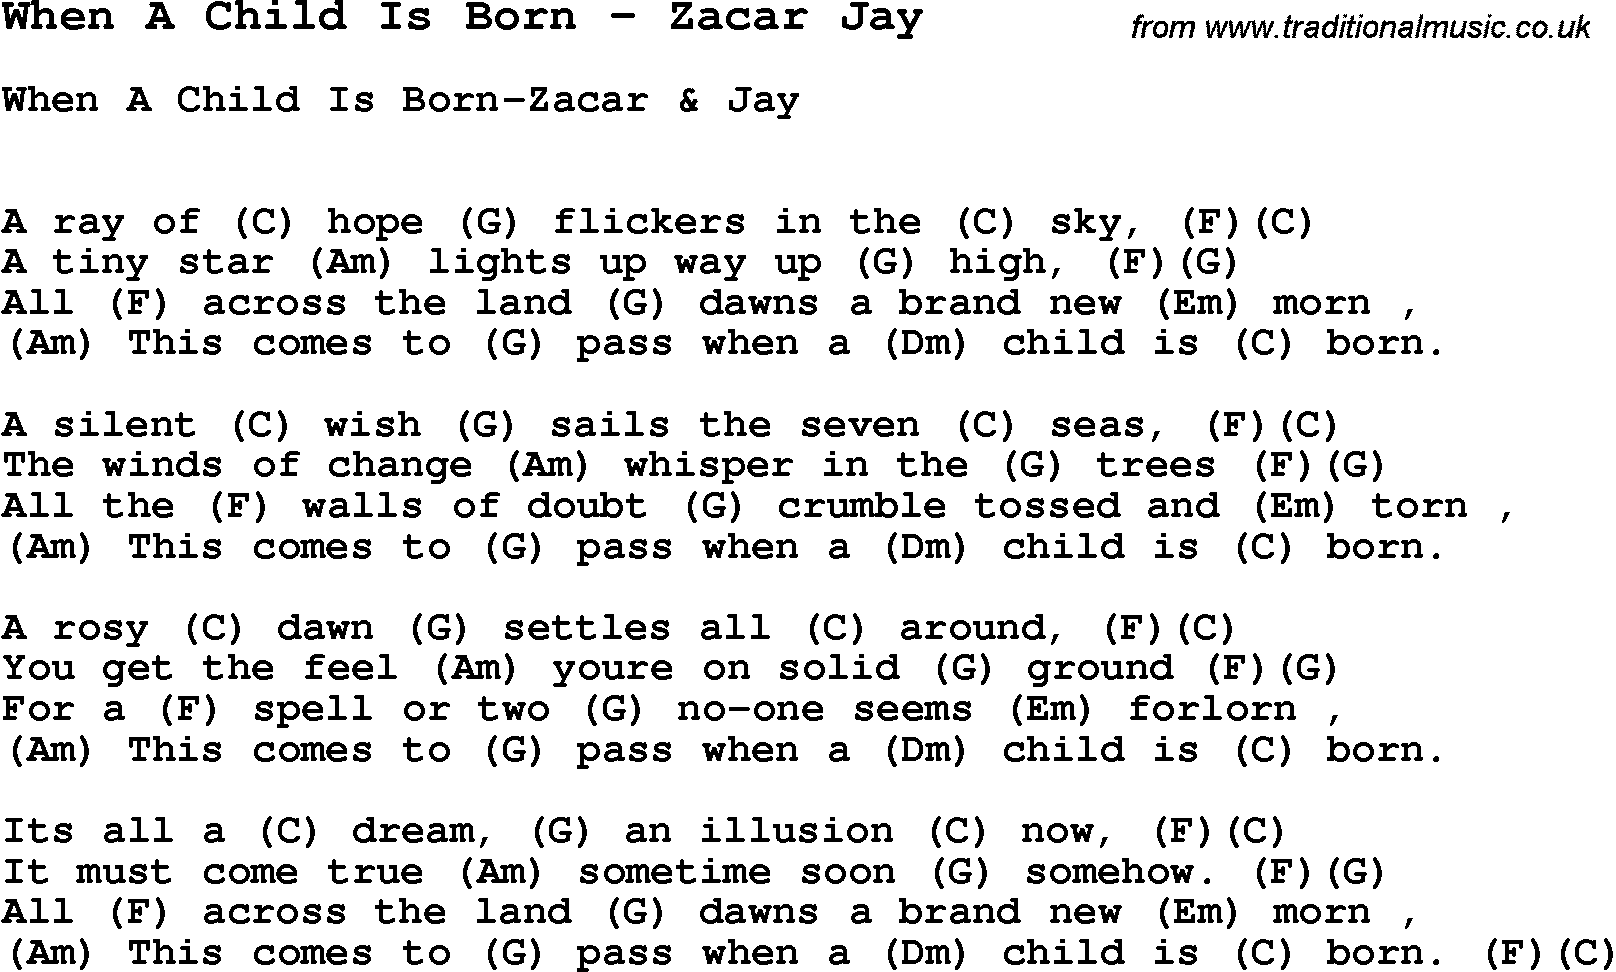 Song When A Child Is Born by Zacar Jay, with lyrics for vocal performance and accompaniment chords for Ukulele, Guitar Banjo etc.